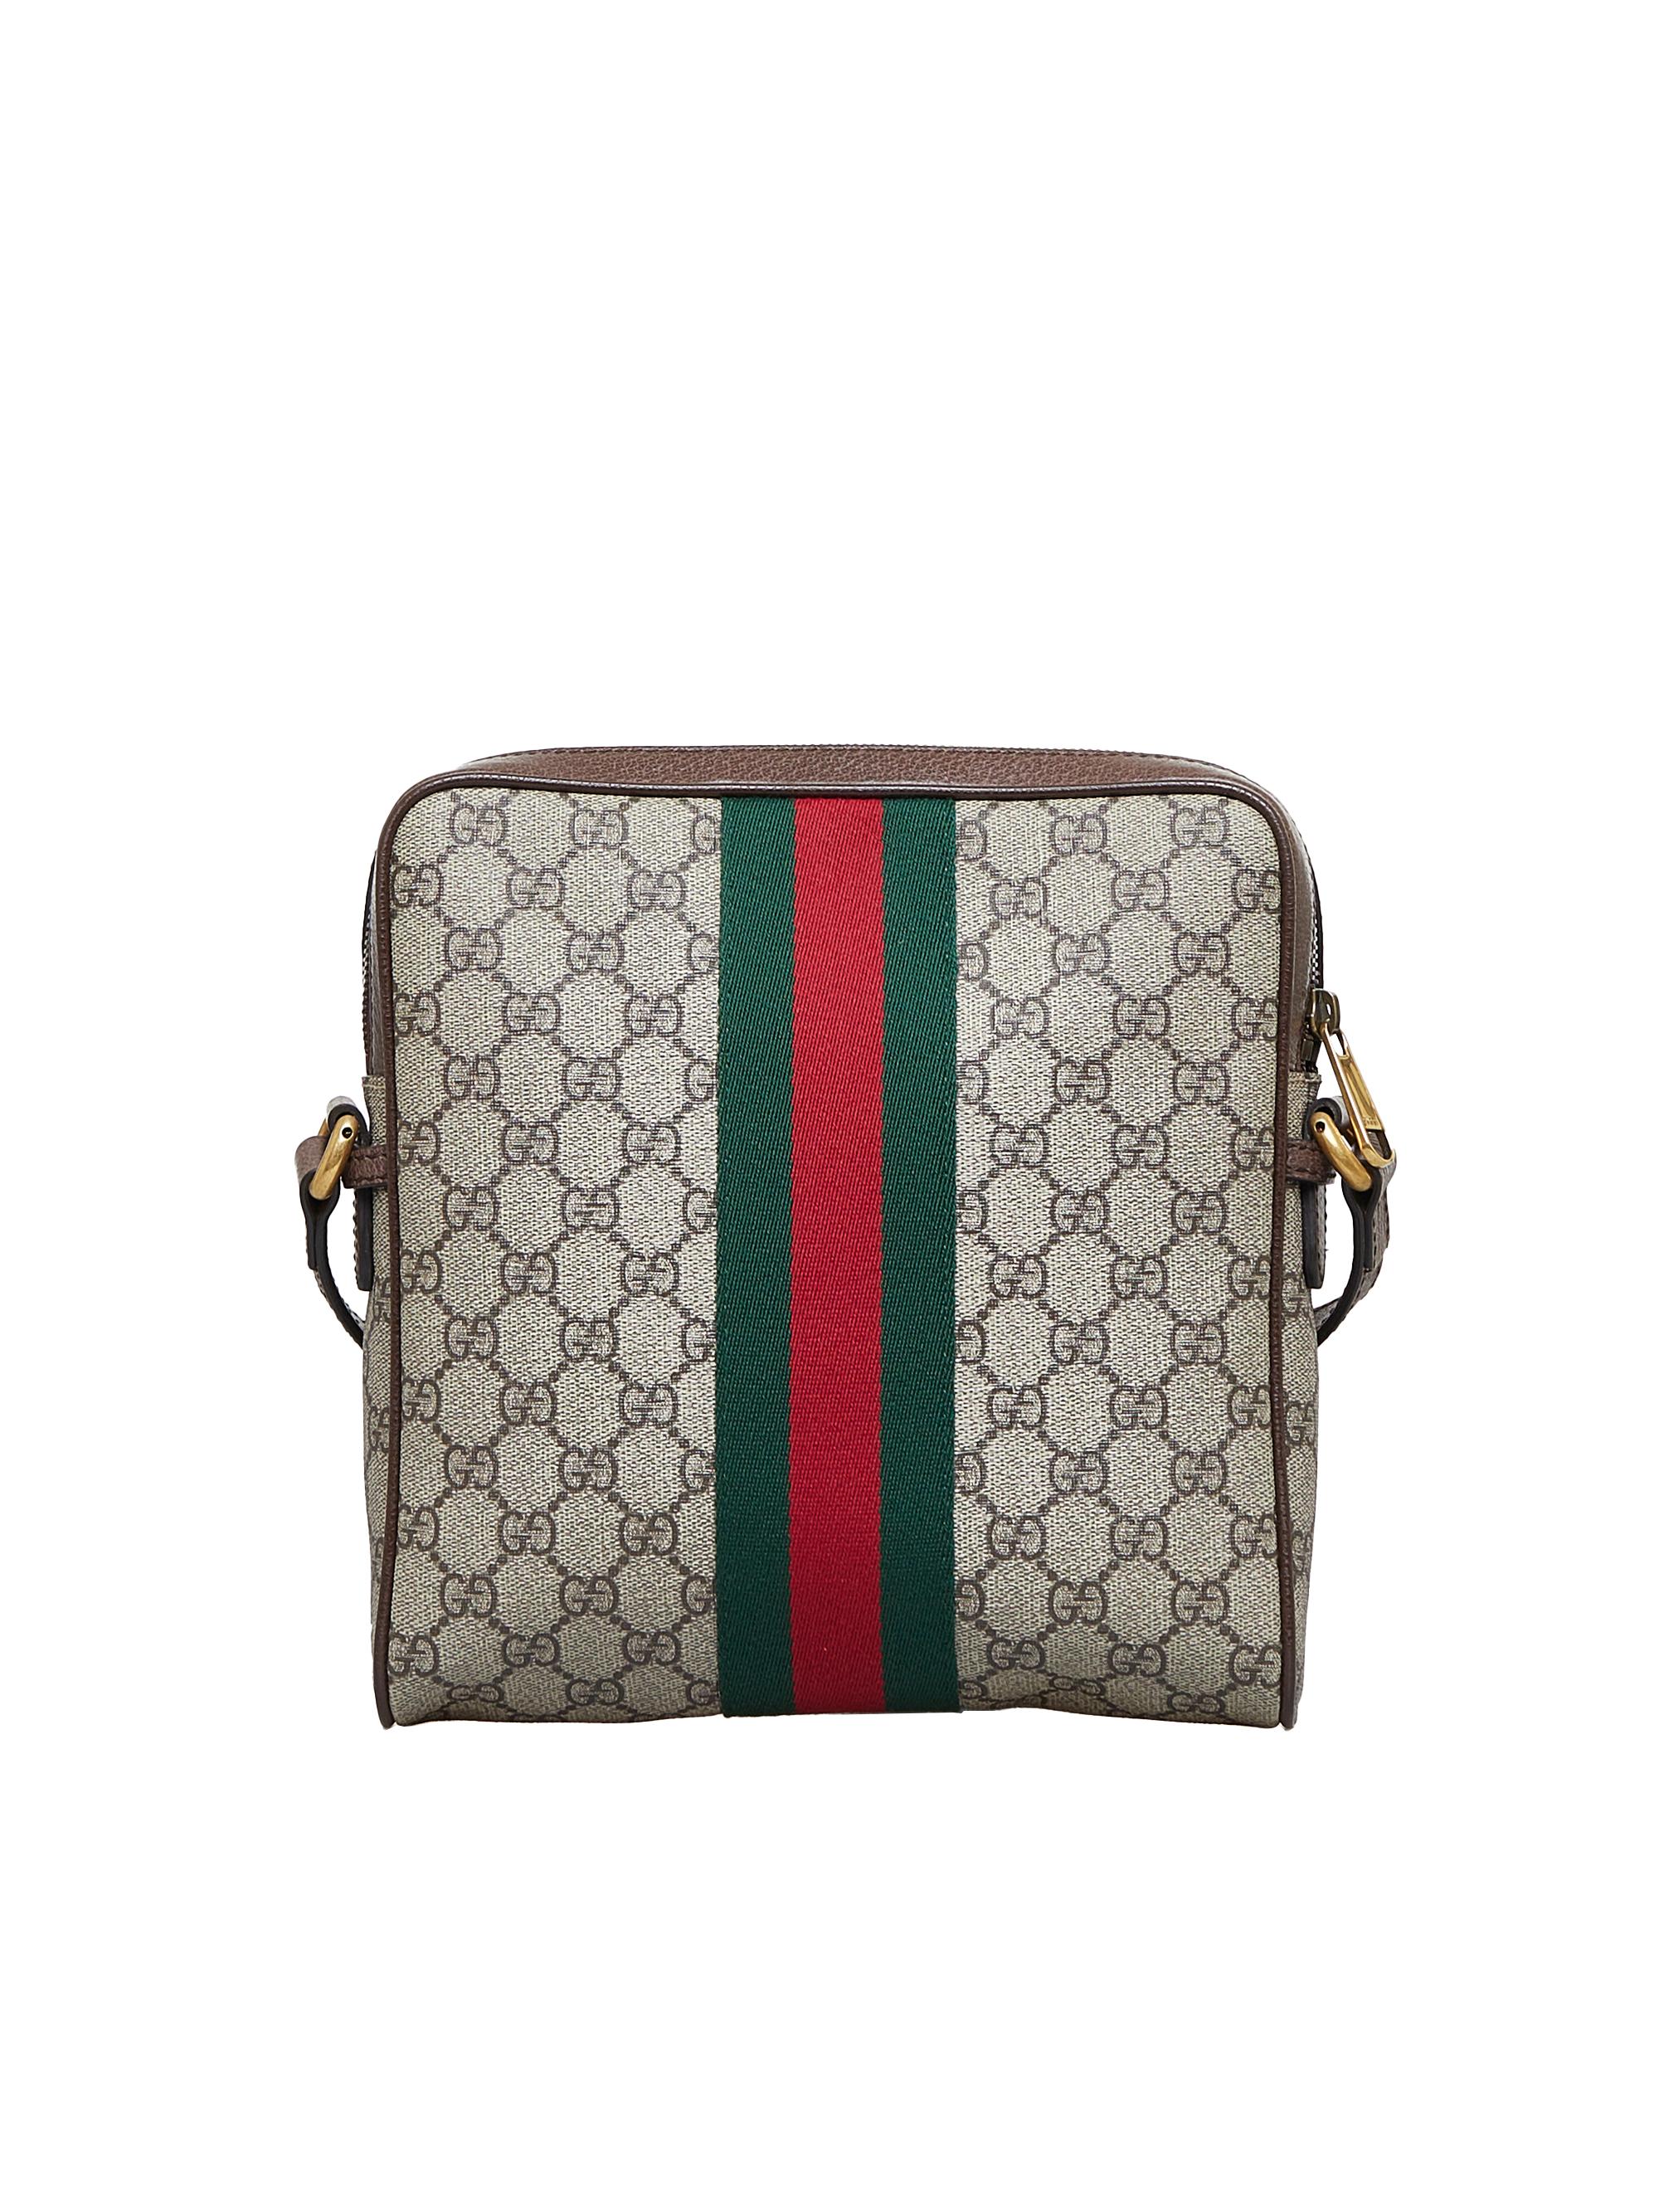 Louis Vuitton City Keepall Bag Leather with Limited Edition Distorted  Damier